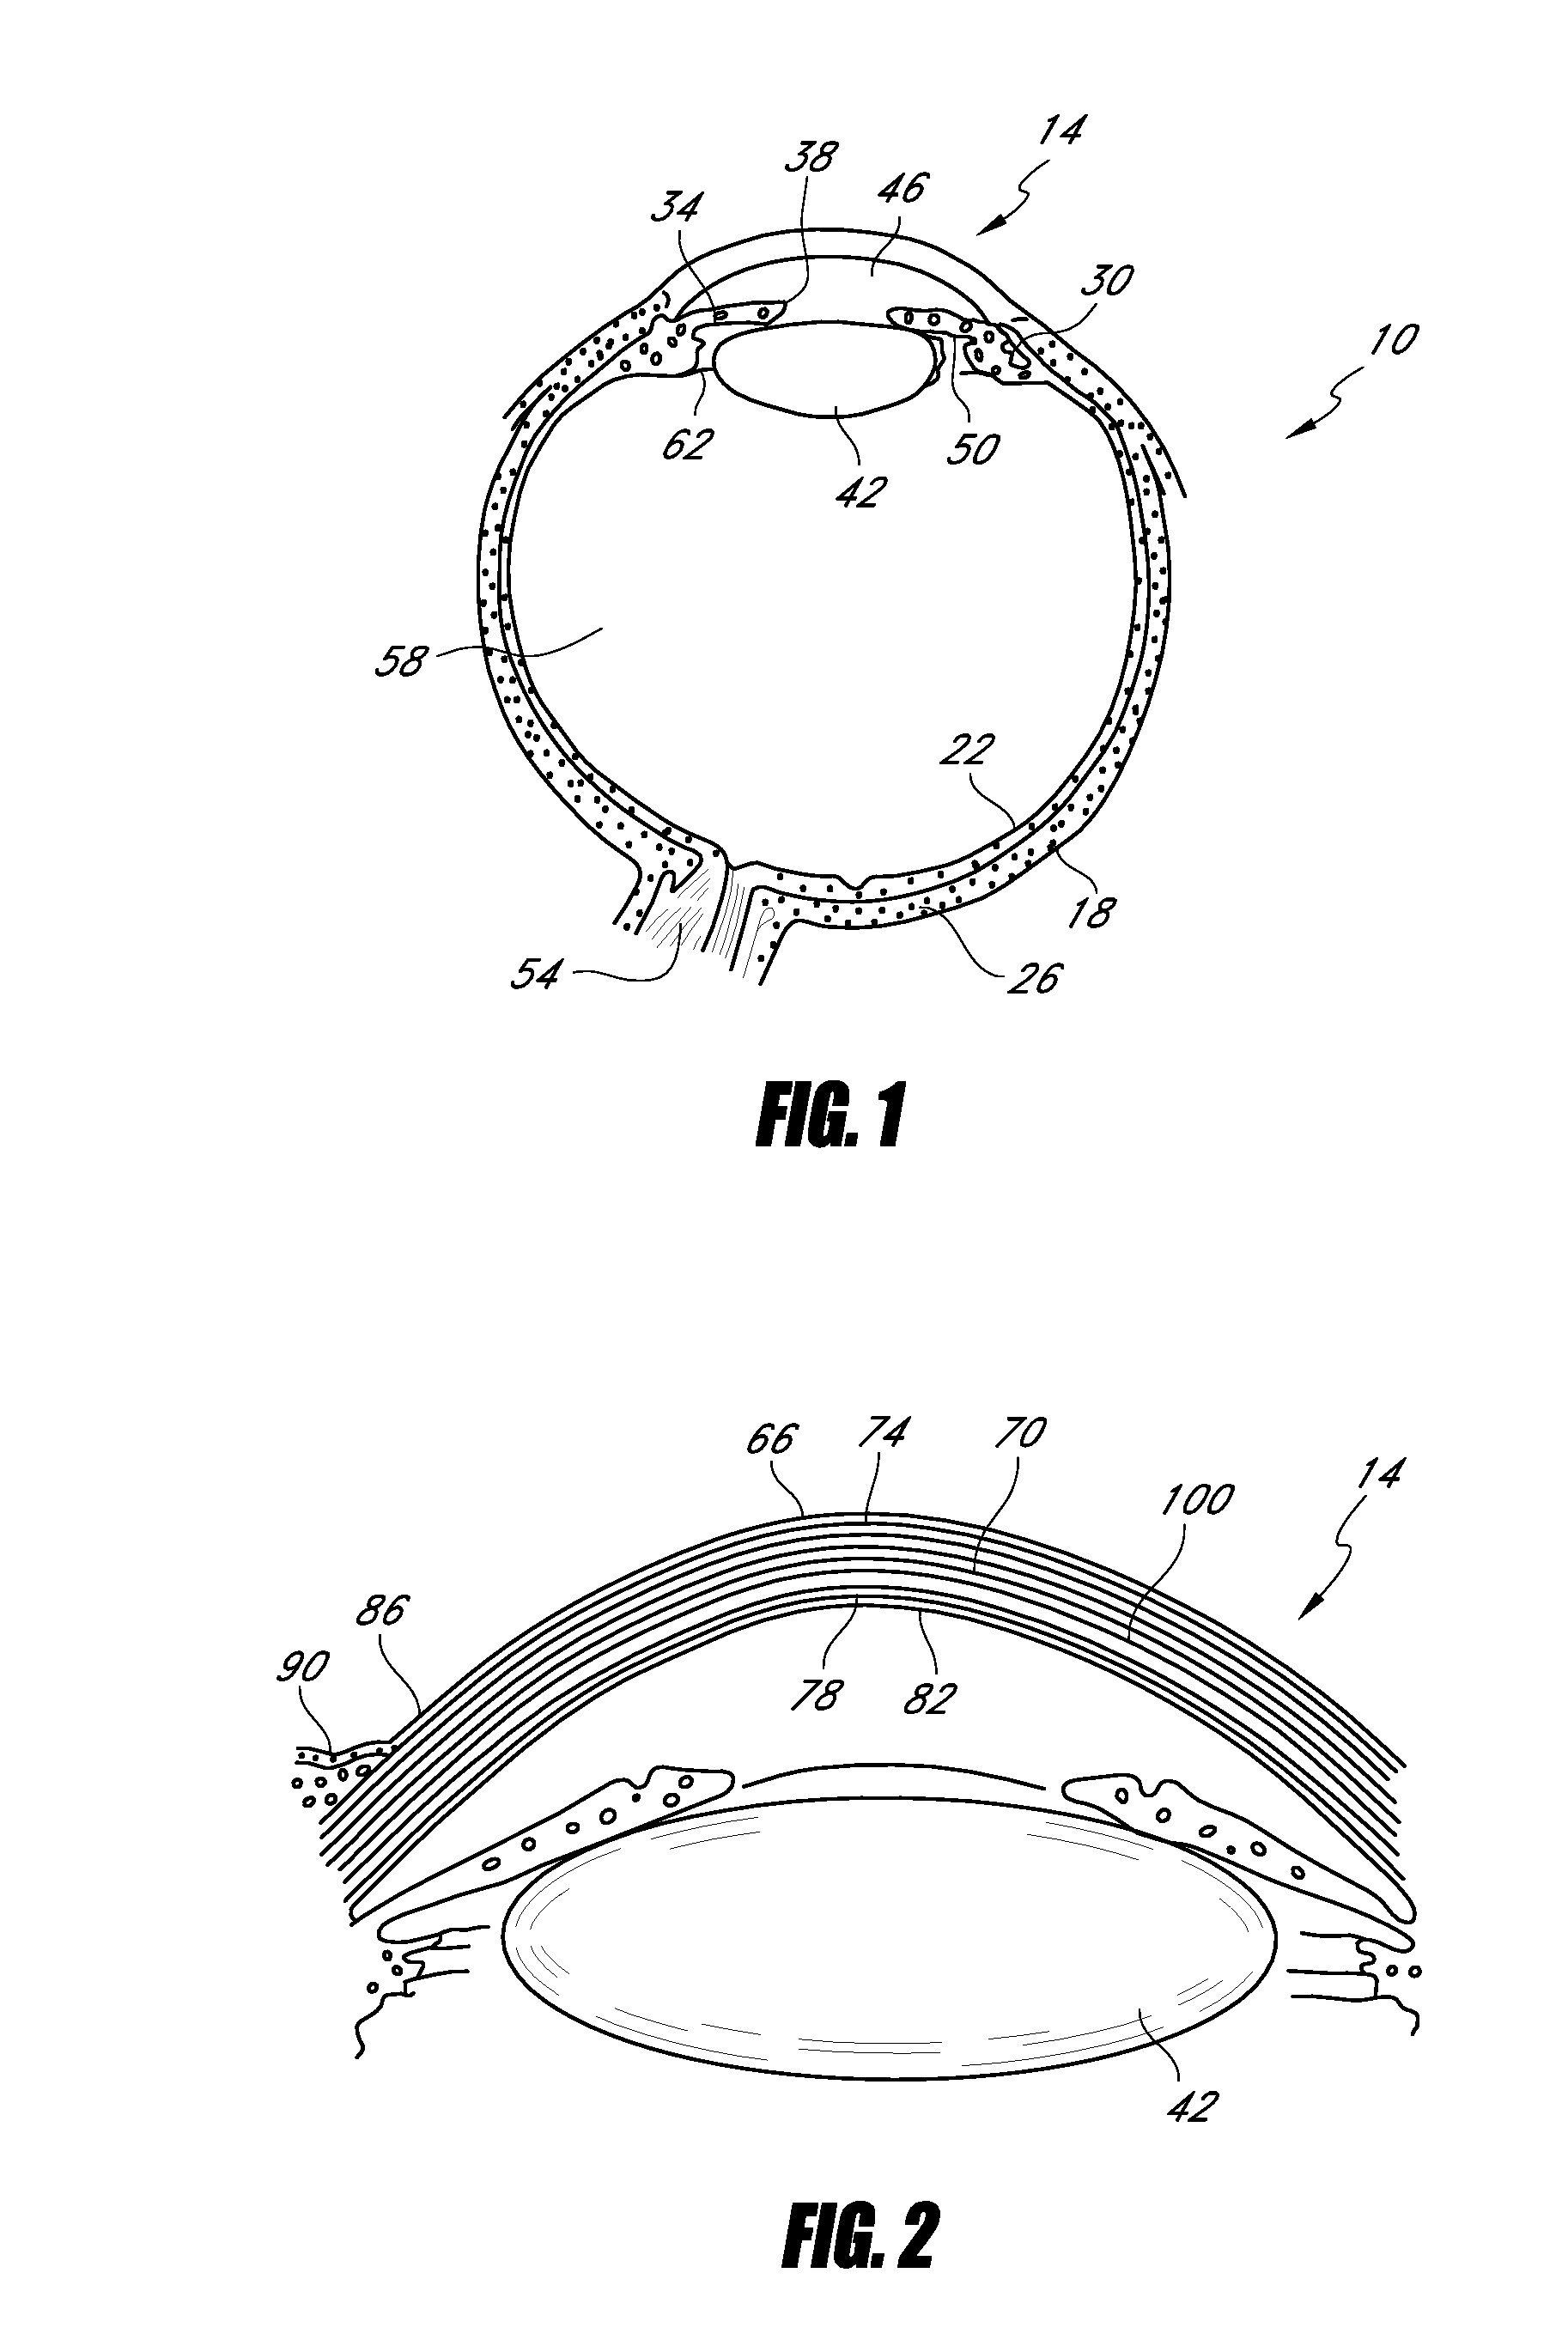 Corneal implant for refractive correction